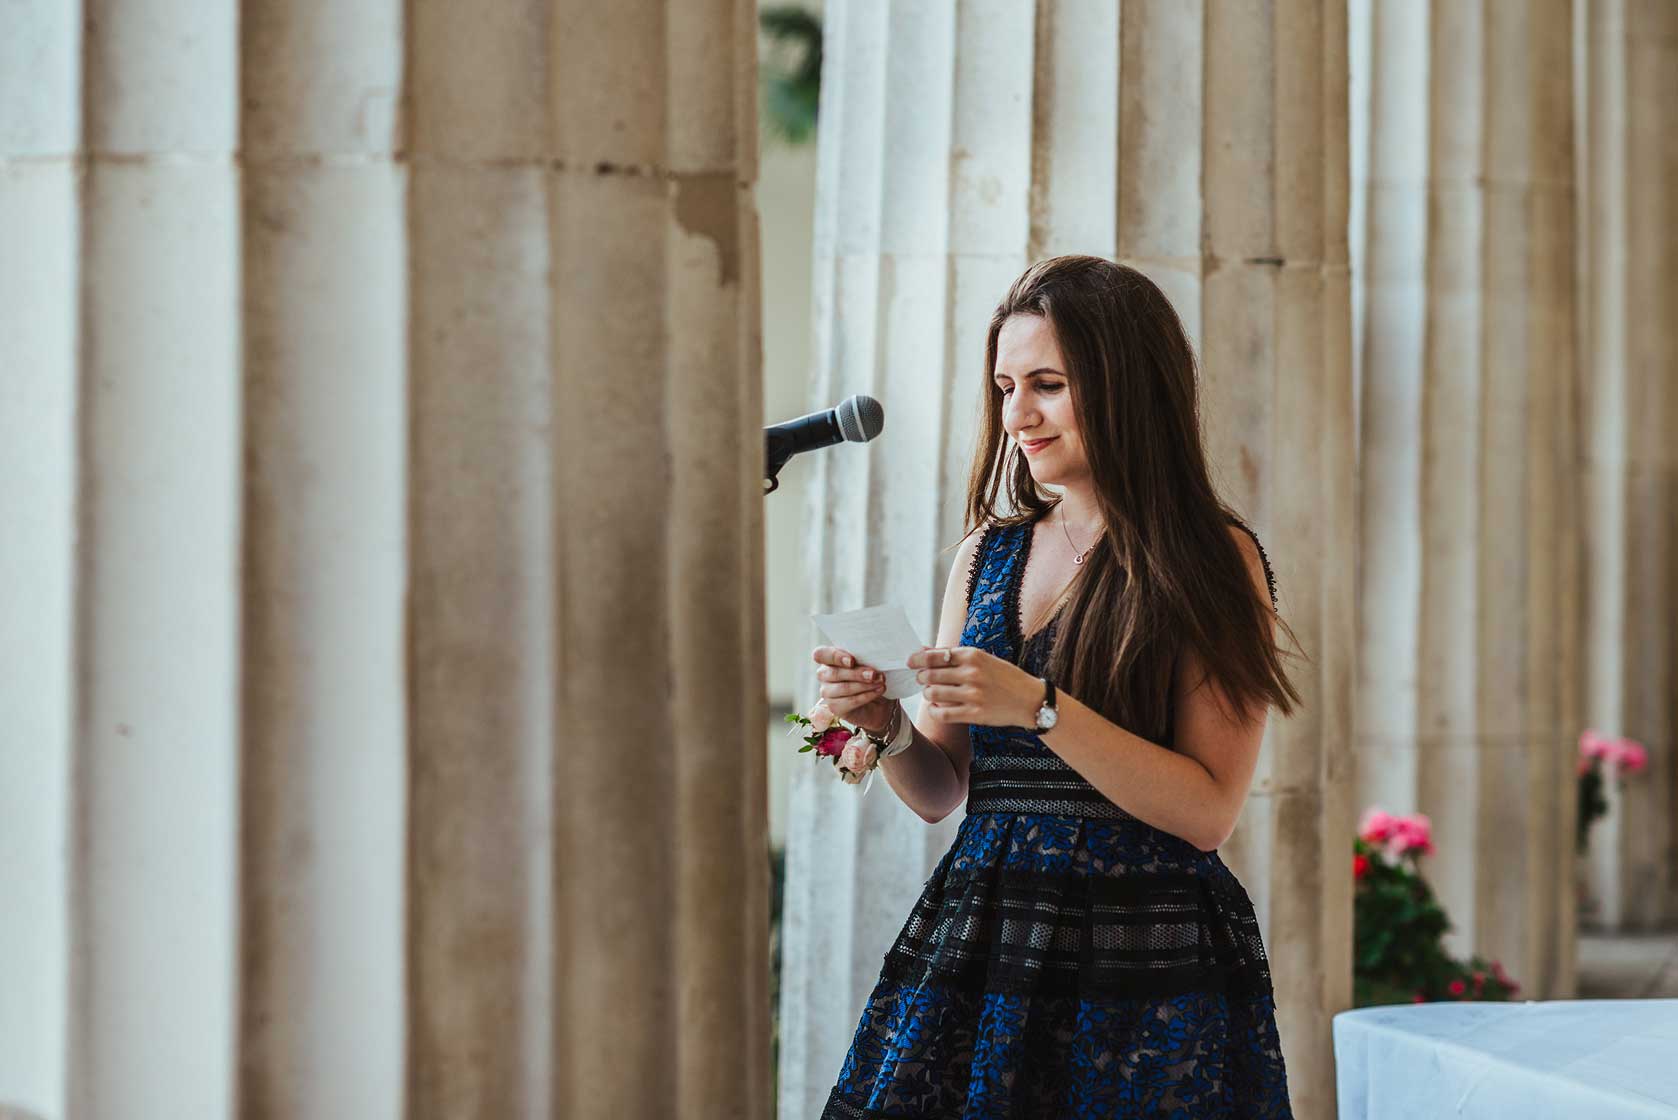 Reportage Wedding Photography at Stoke Park